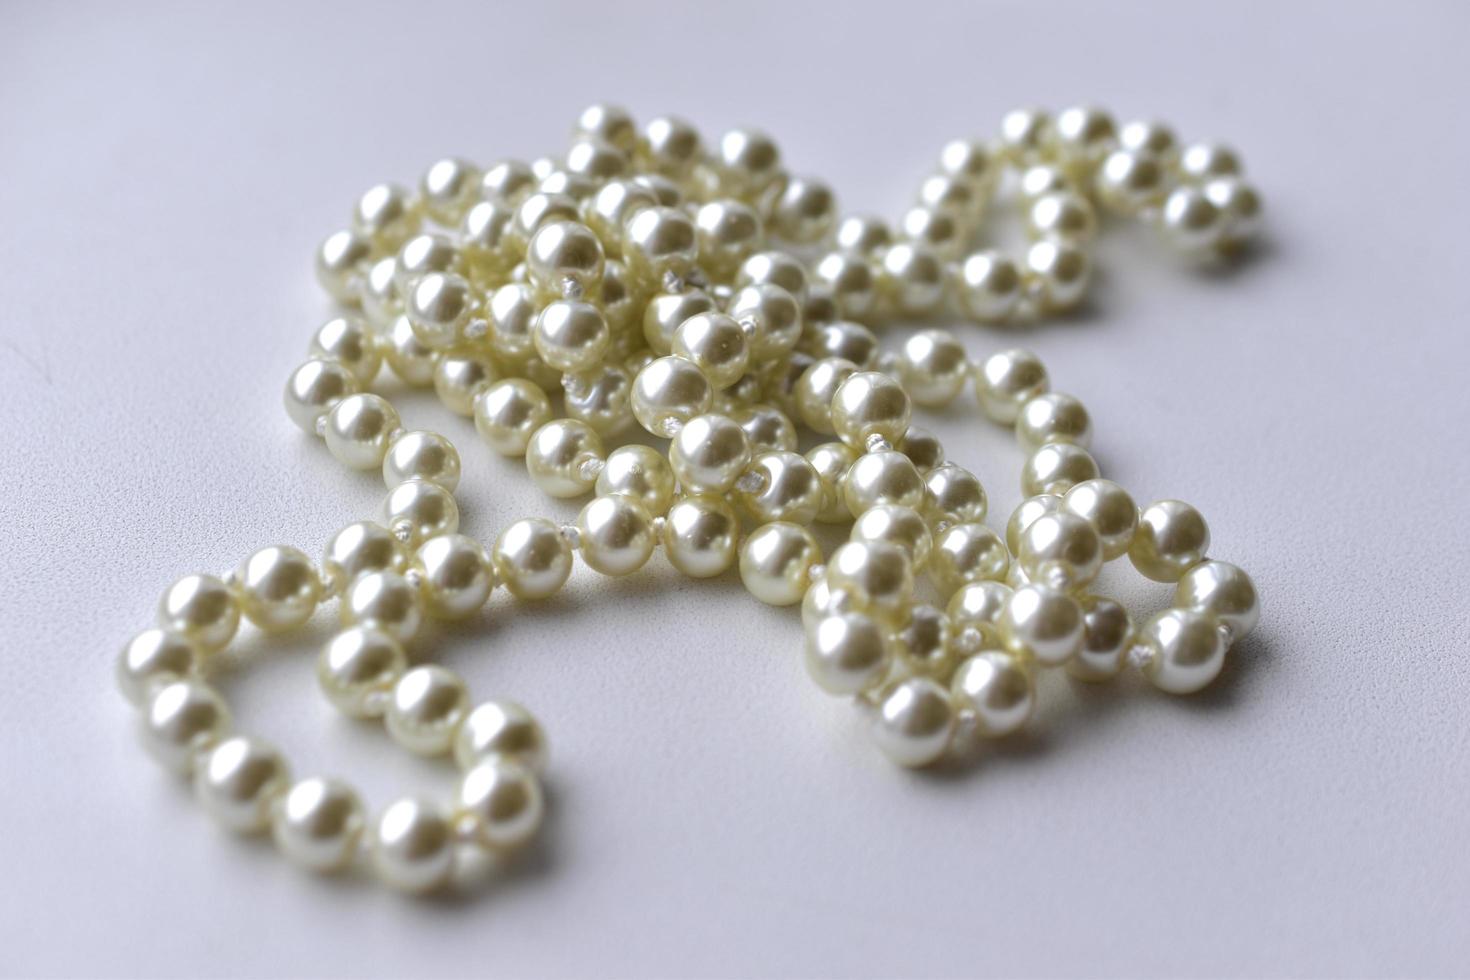 White pearl necklace beads on white background photo